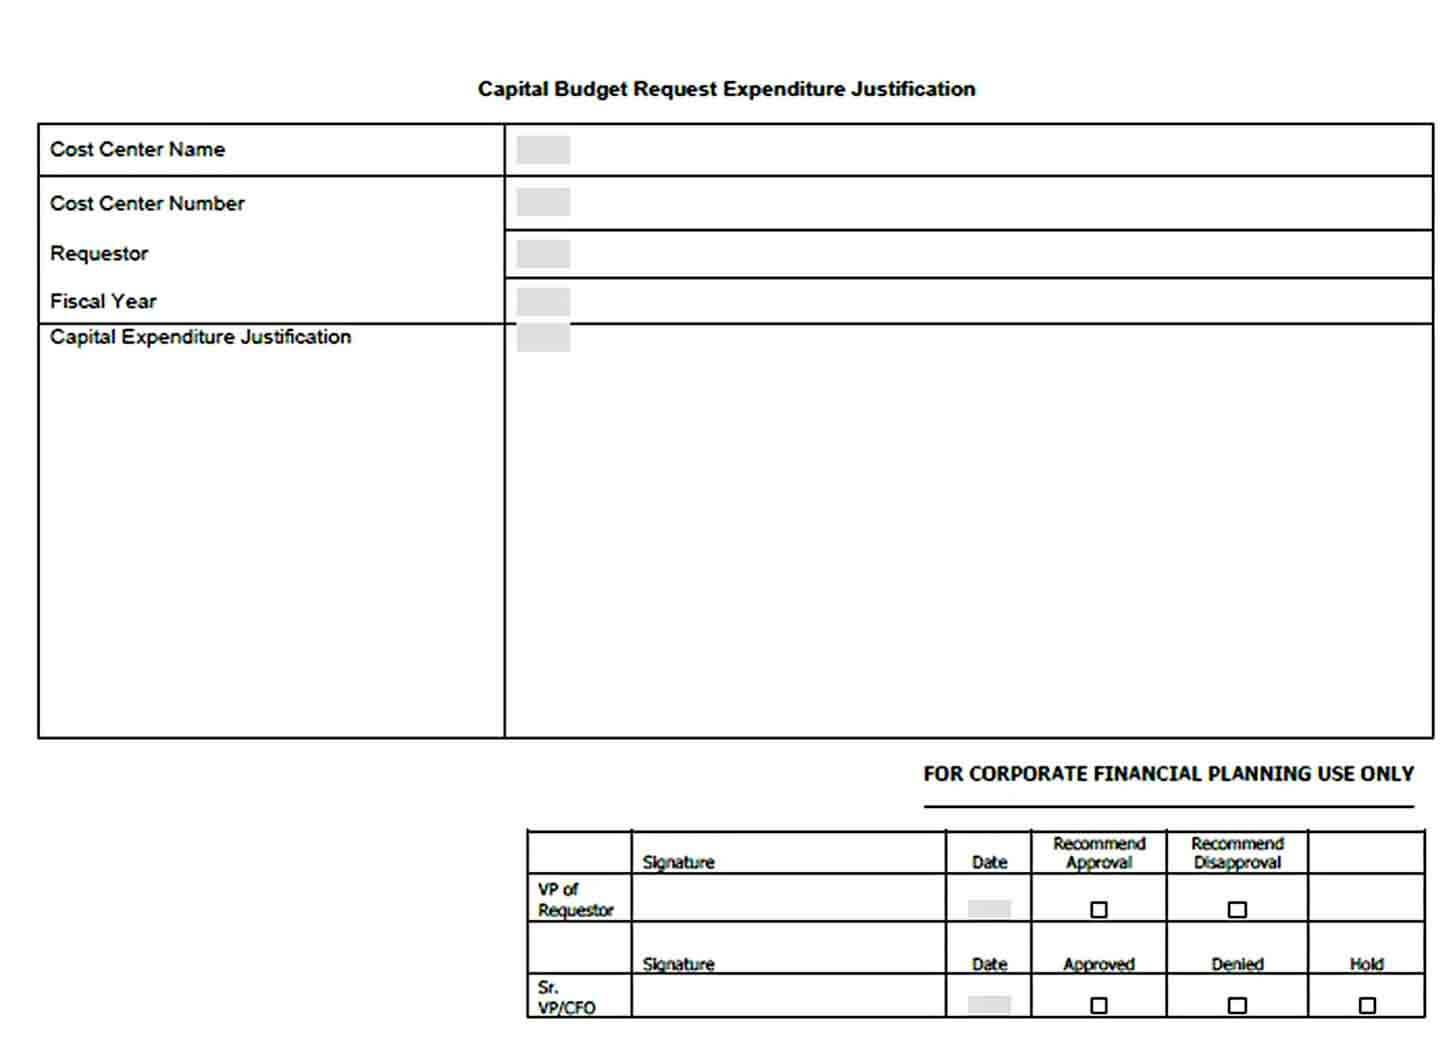 Capital budget Request Expenditure template